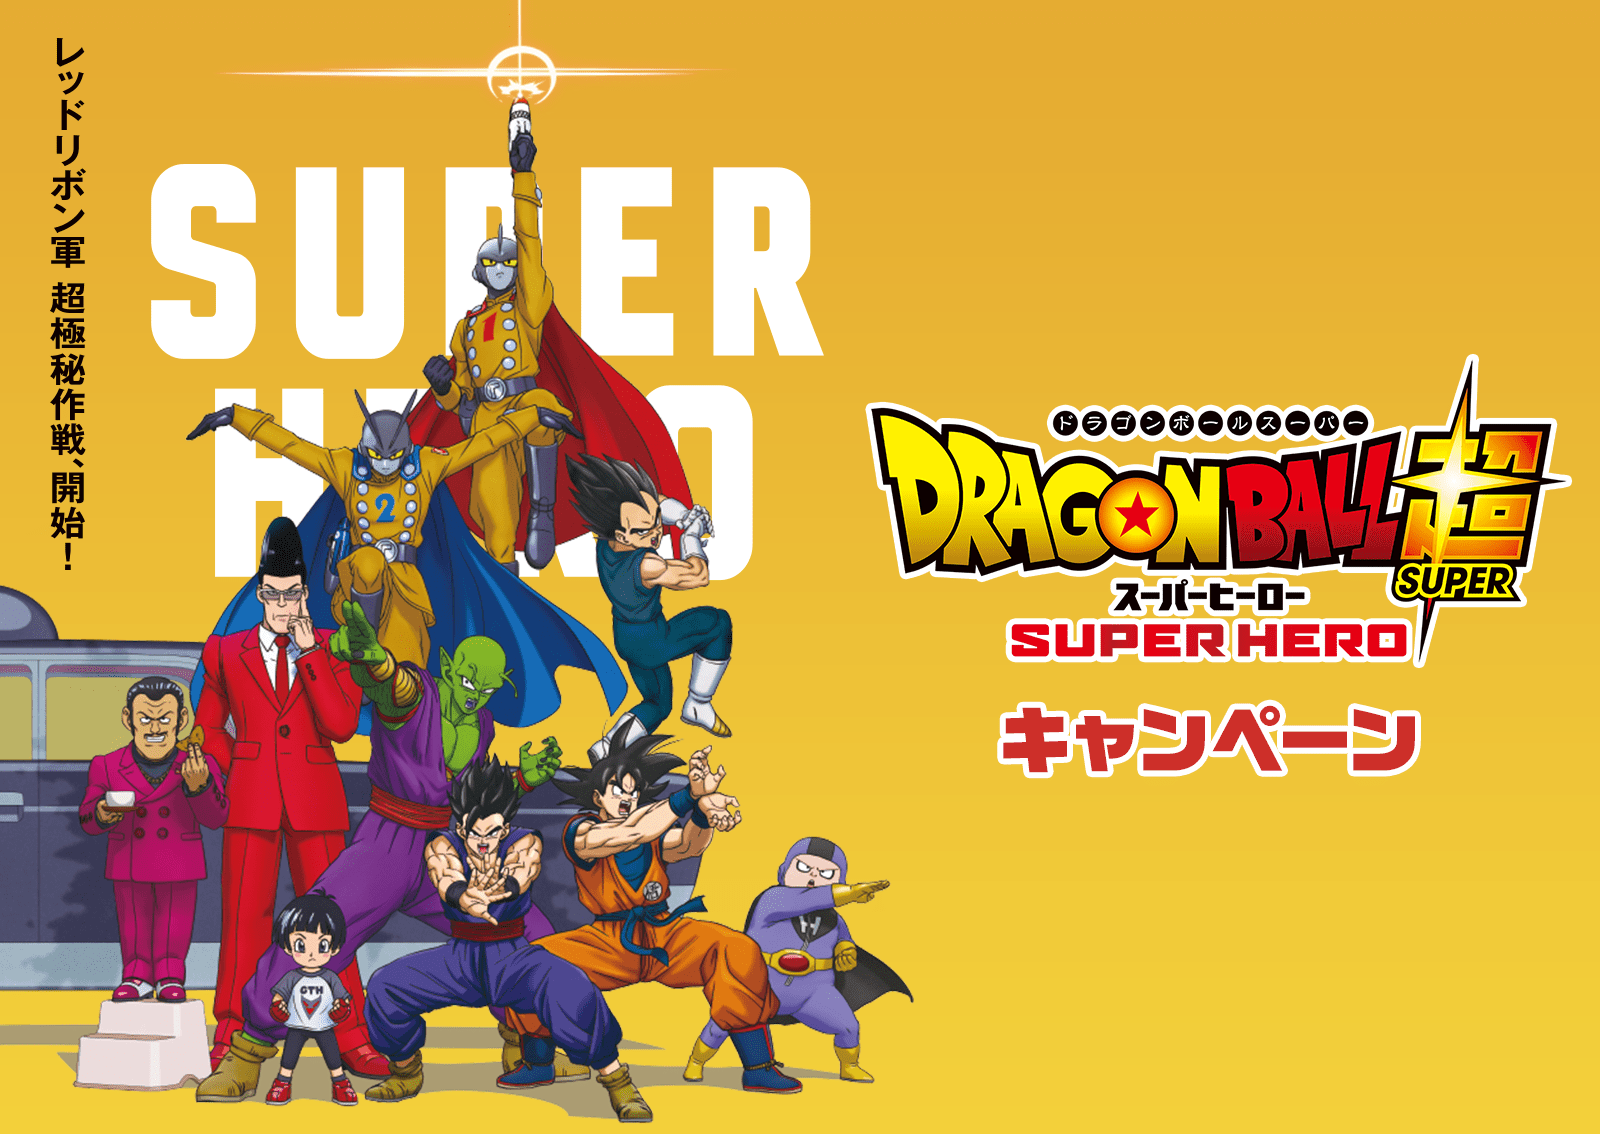 Dragon Ball Super Super Hero Snacks and Goods Offered at Lawson